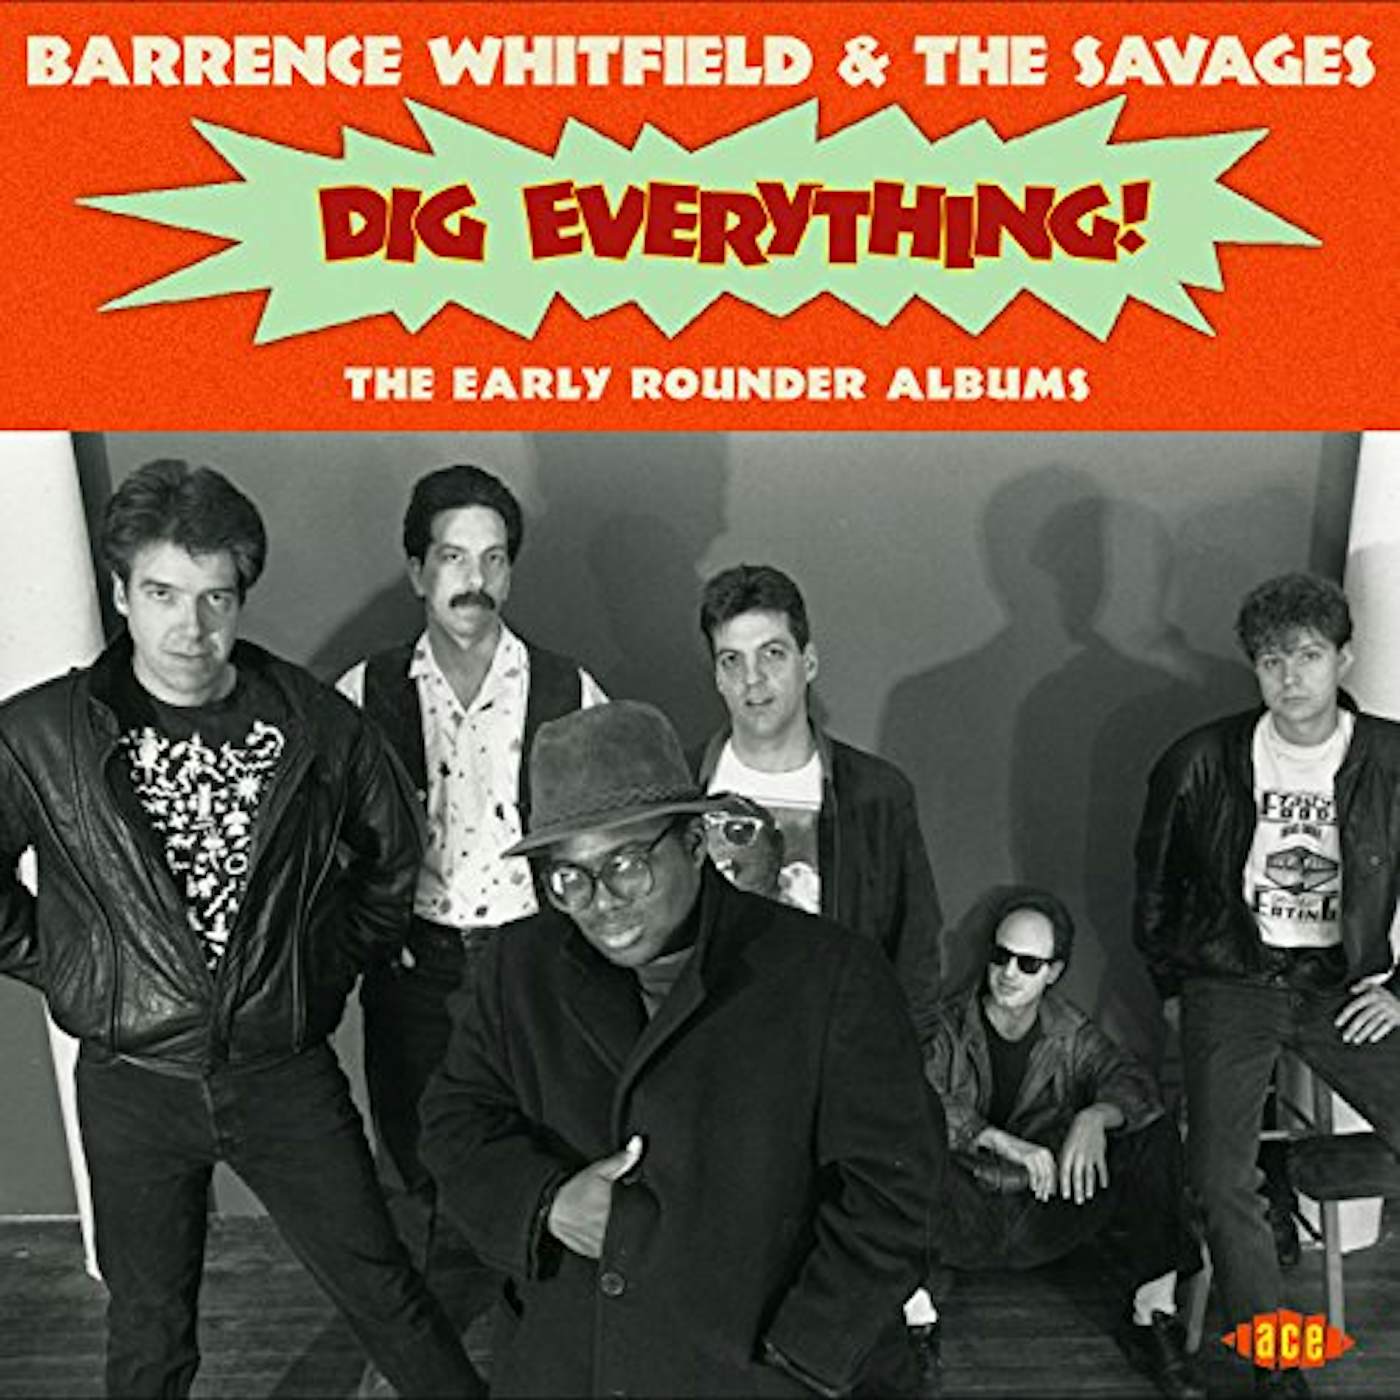 Barrence Whitfield & The Savages DIG EVERYTHING: THE EARLY ROUNDER ALBUMS CD